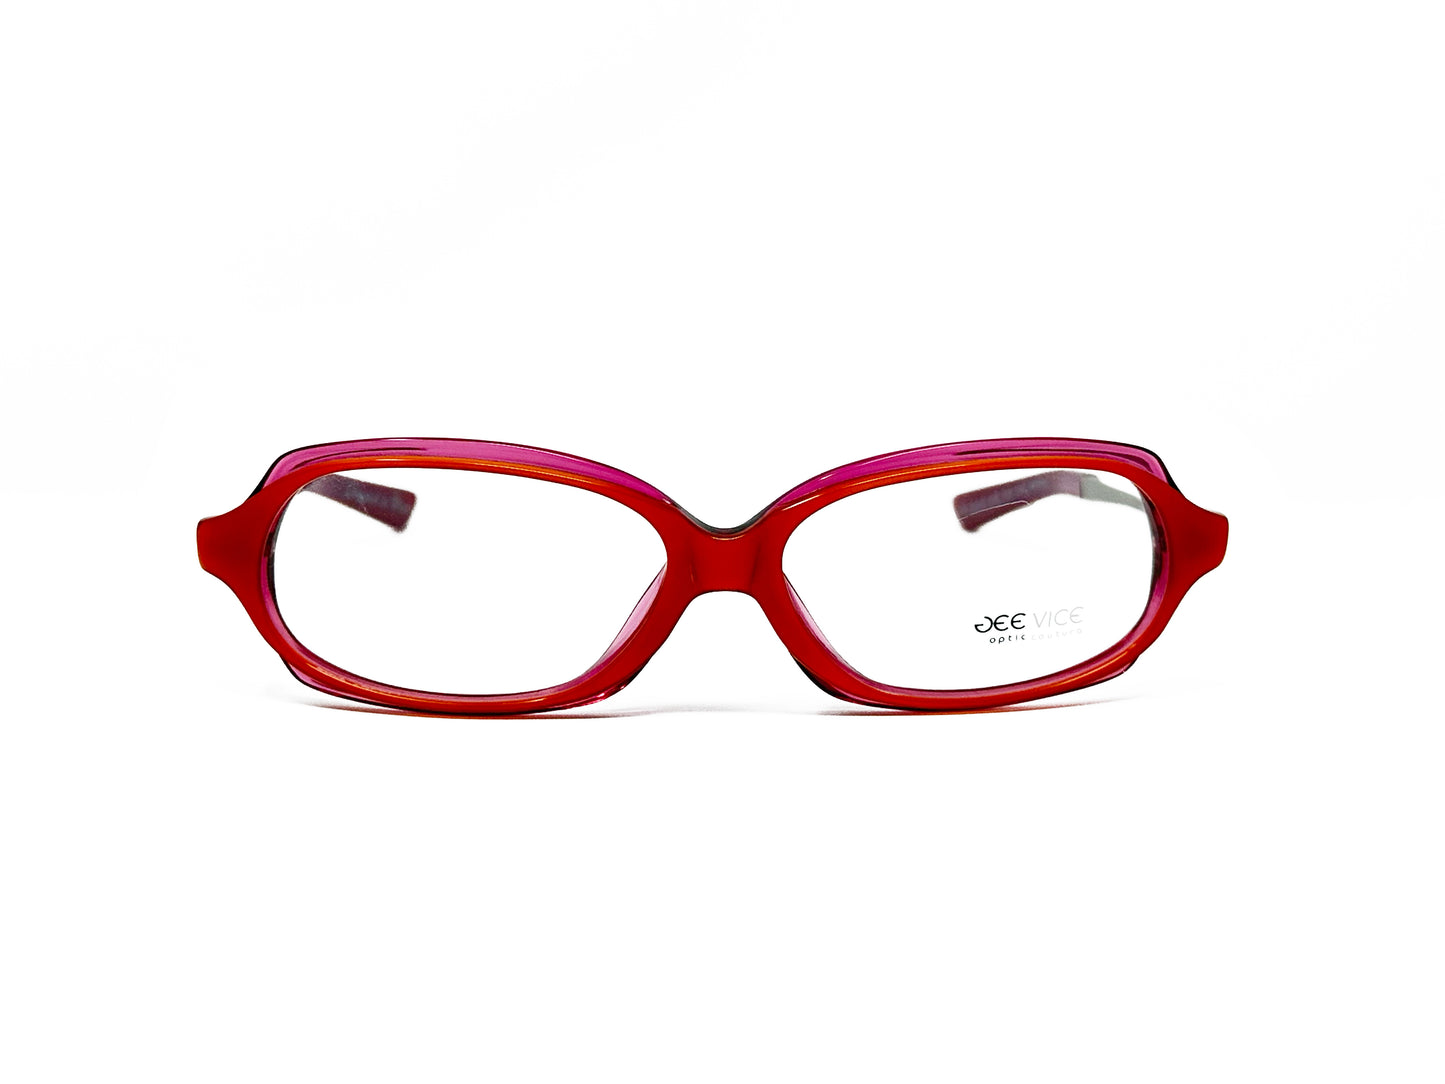 Gee Vice uplifted, curved, rectangular, optical frame with acetate front and metal temples. Model: Premiere. Color: Semi-transparent red. Front view. 